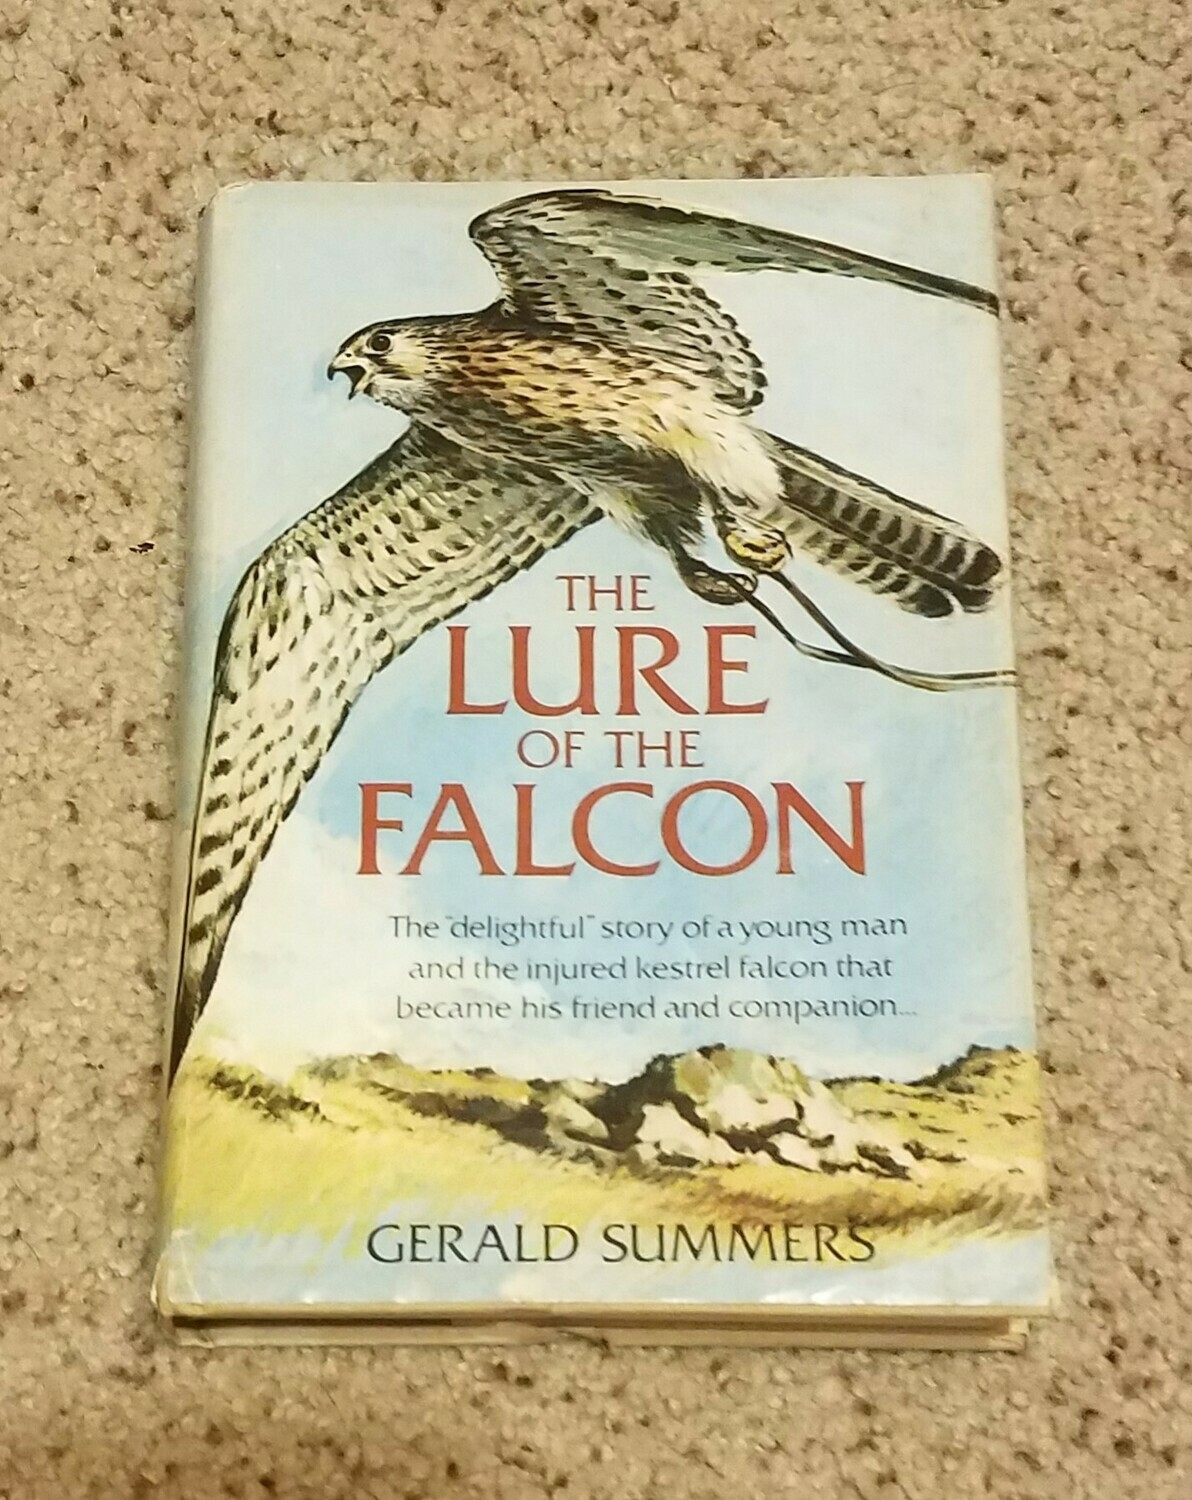 The Lure of the Falcon by Gerald Summers